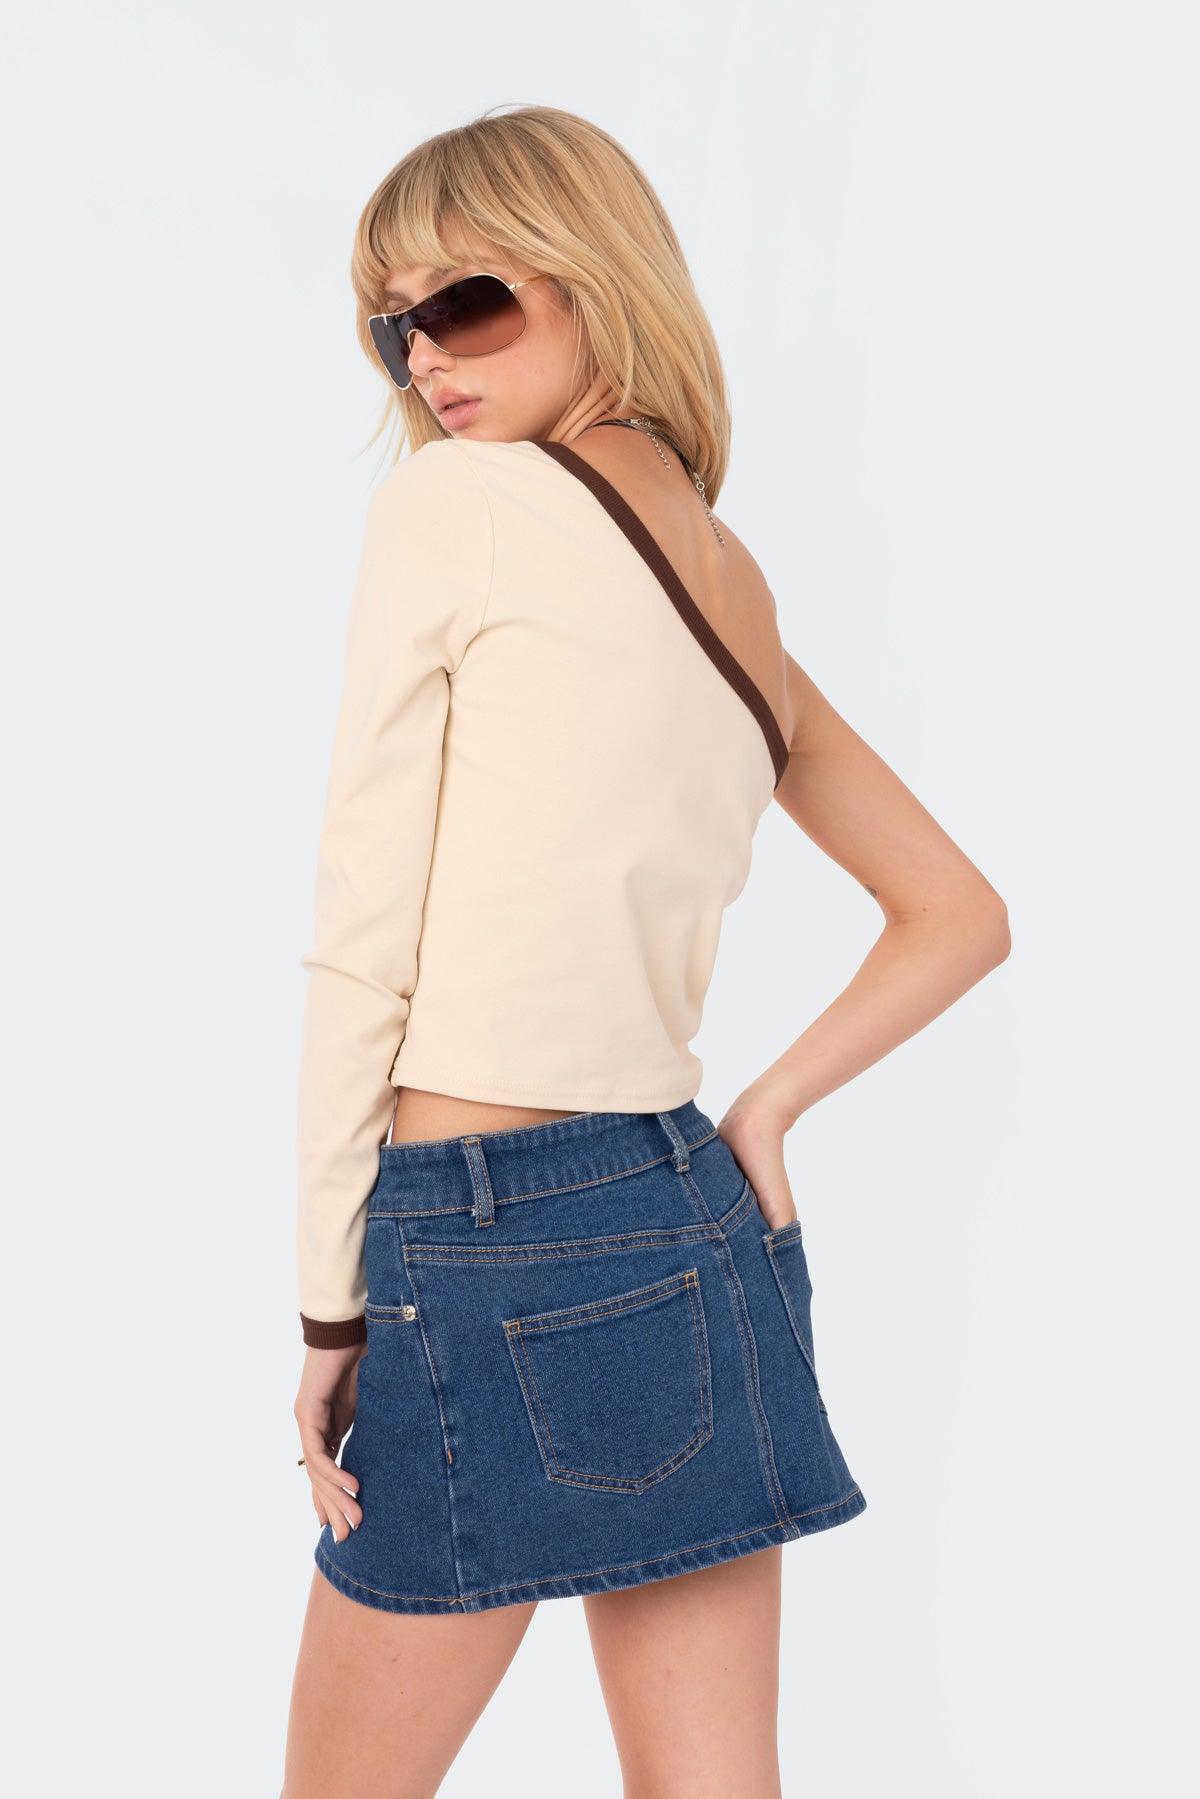 Nyra One Shoulder Top